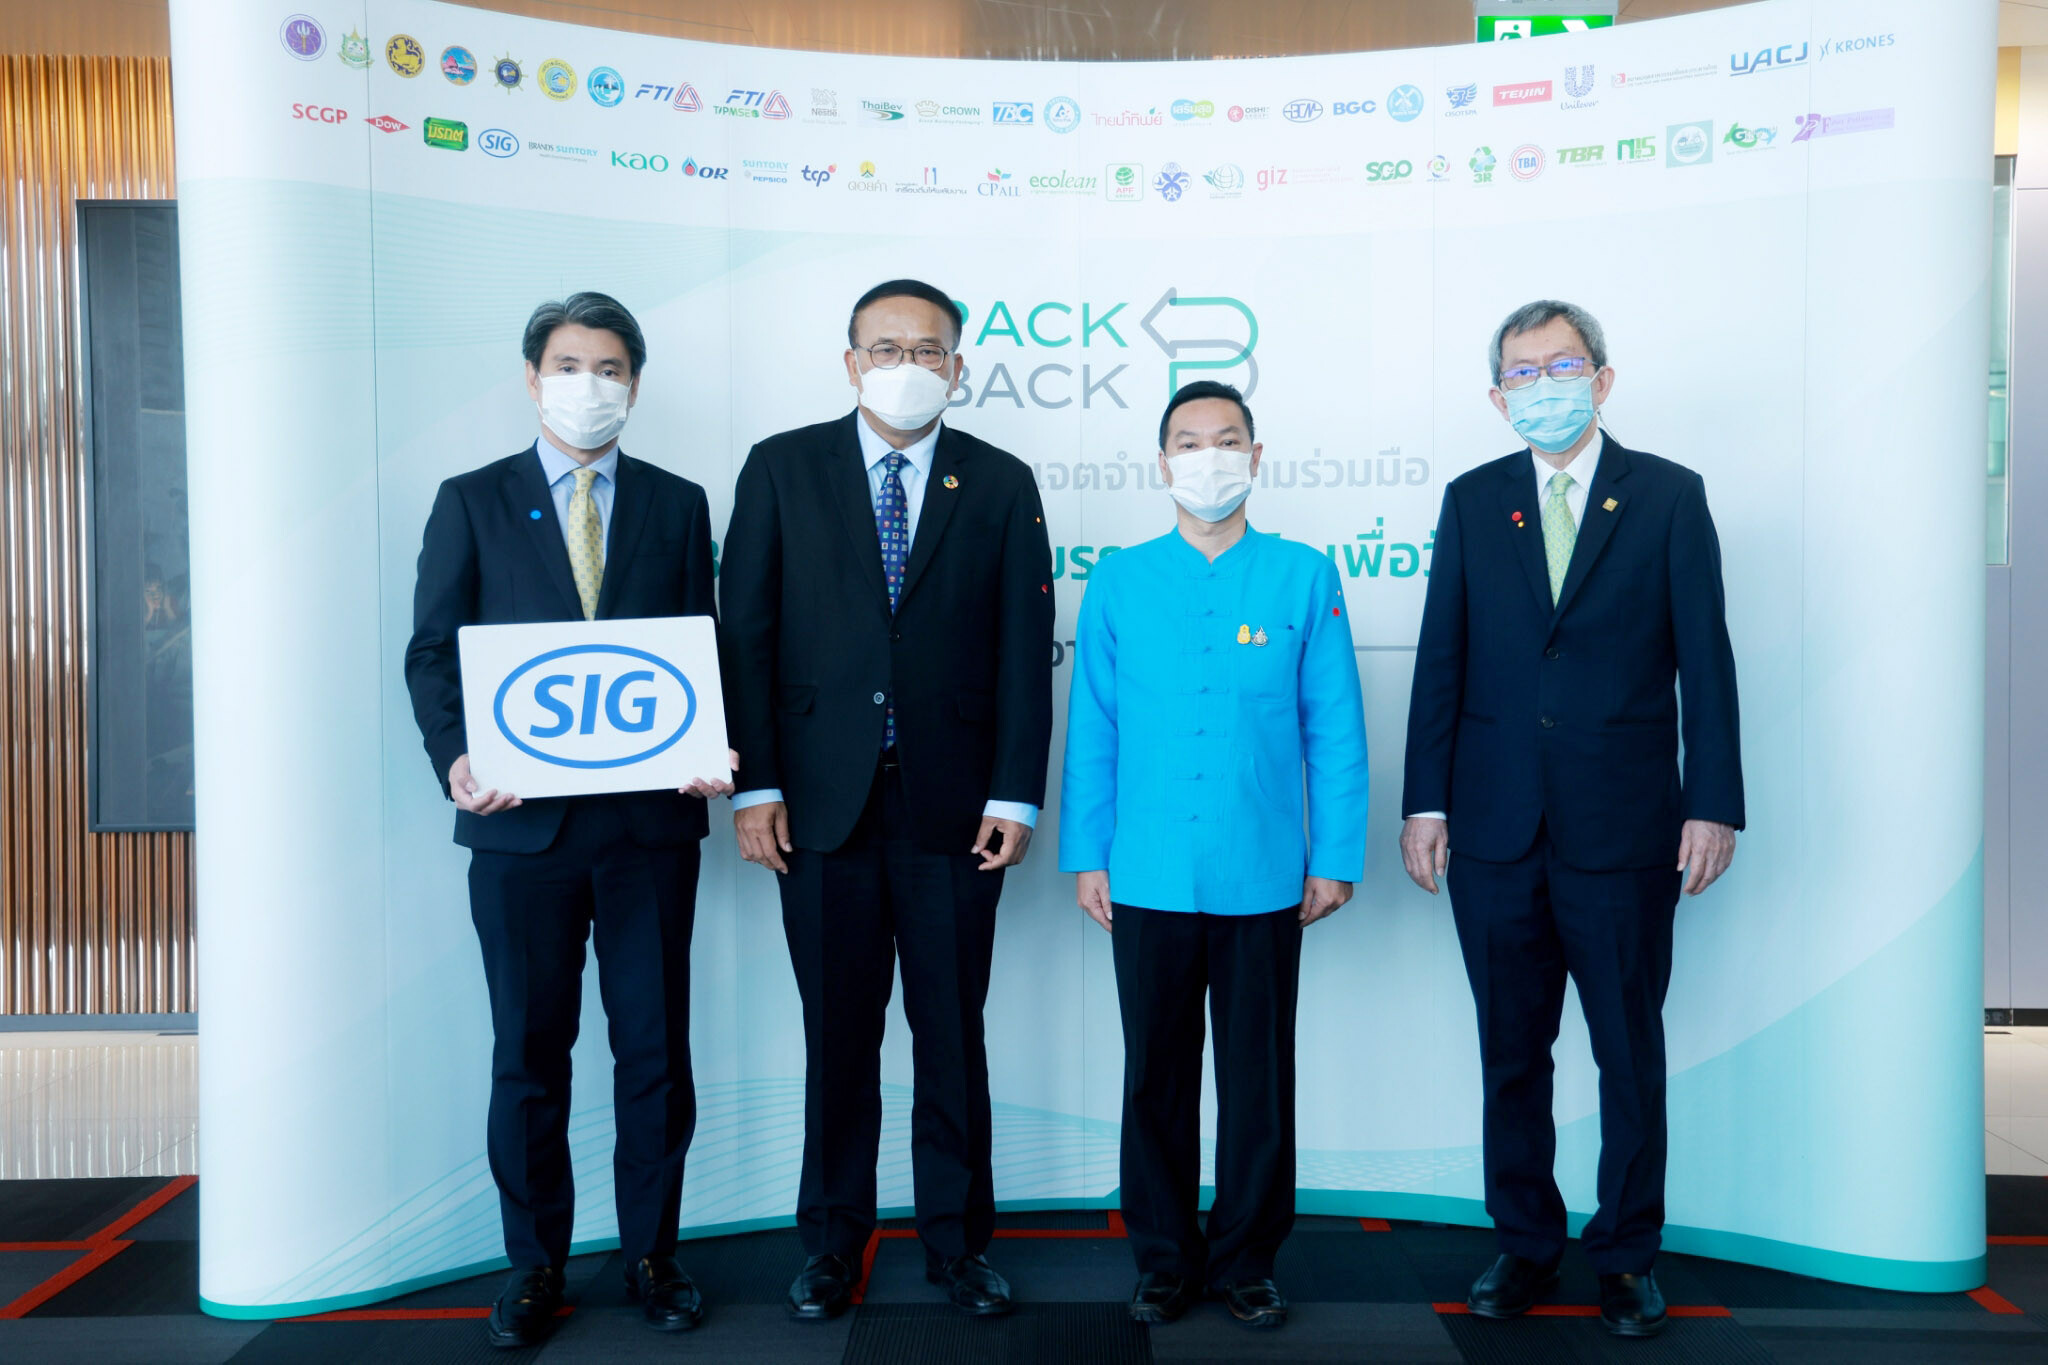 "SIG Combibloc" Joins Public Sector and 50 Forefront Organizations to Recycle Packages under EPR Concept